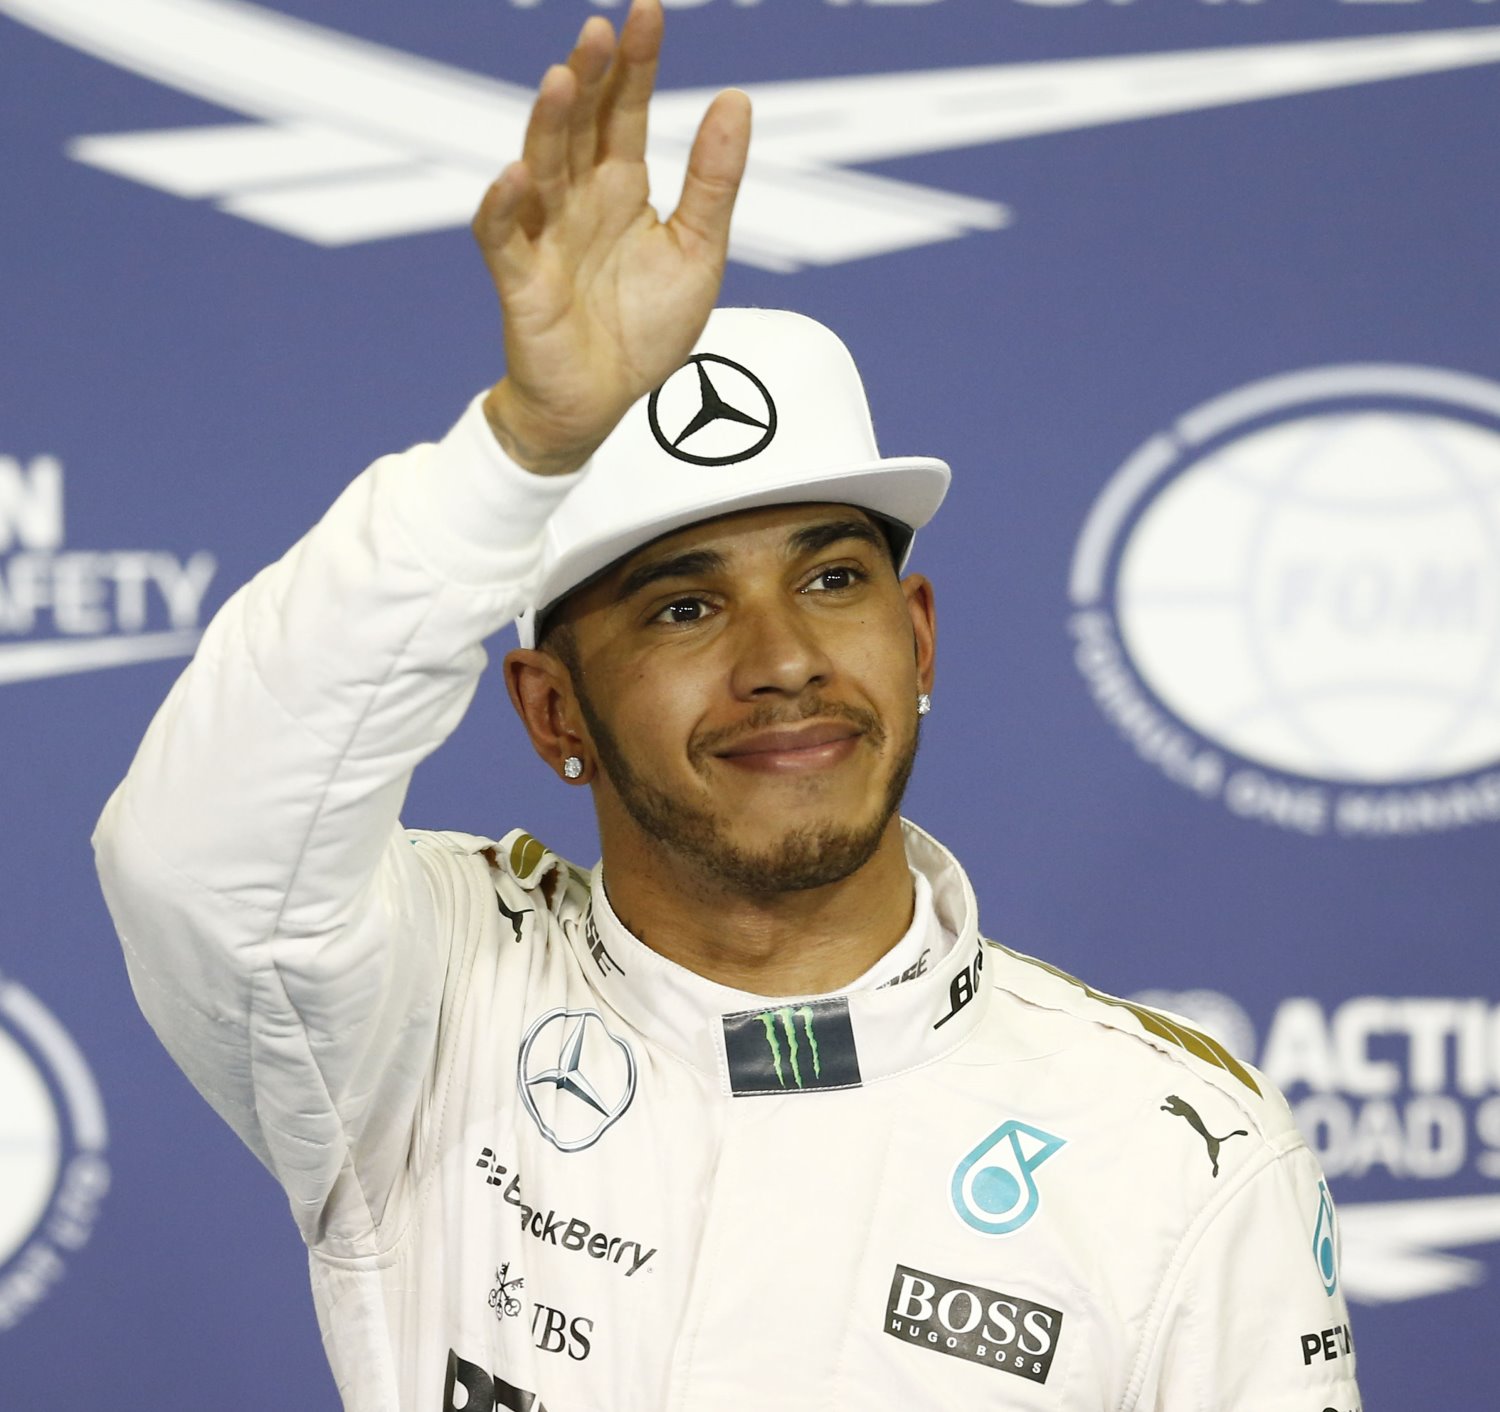 Hamilton waves after qualifying 2nd